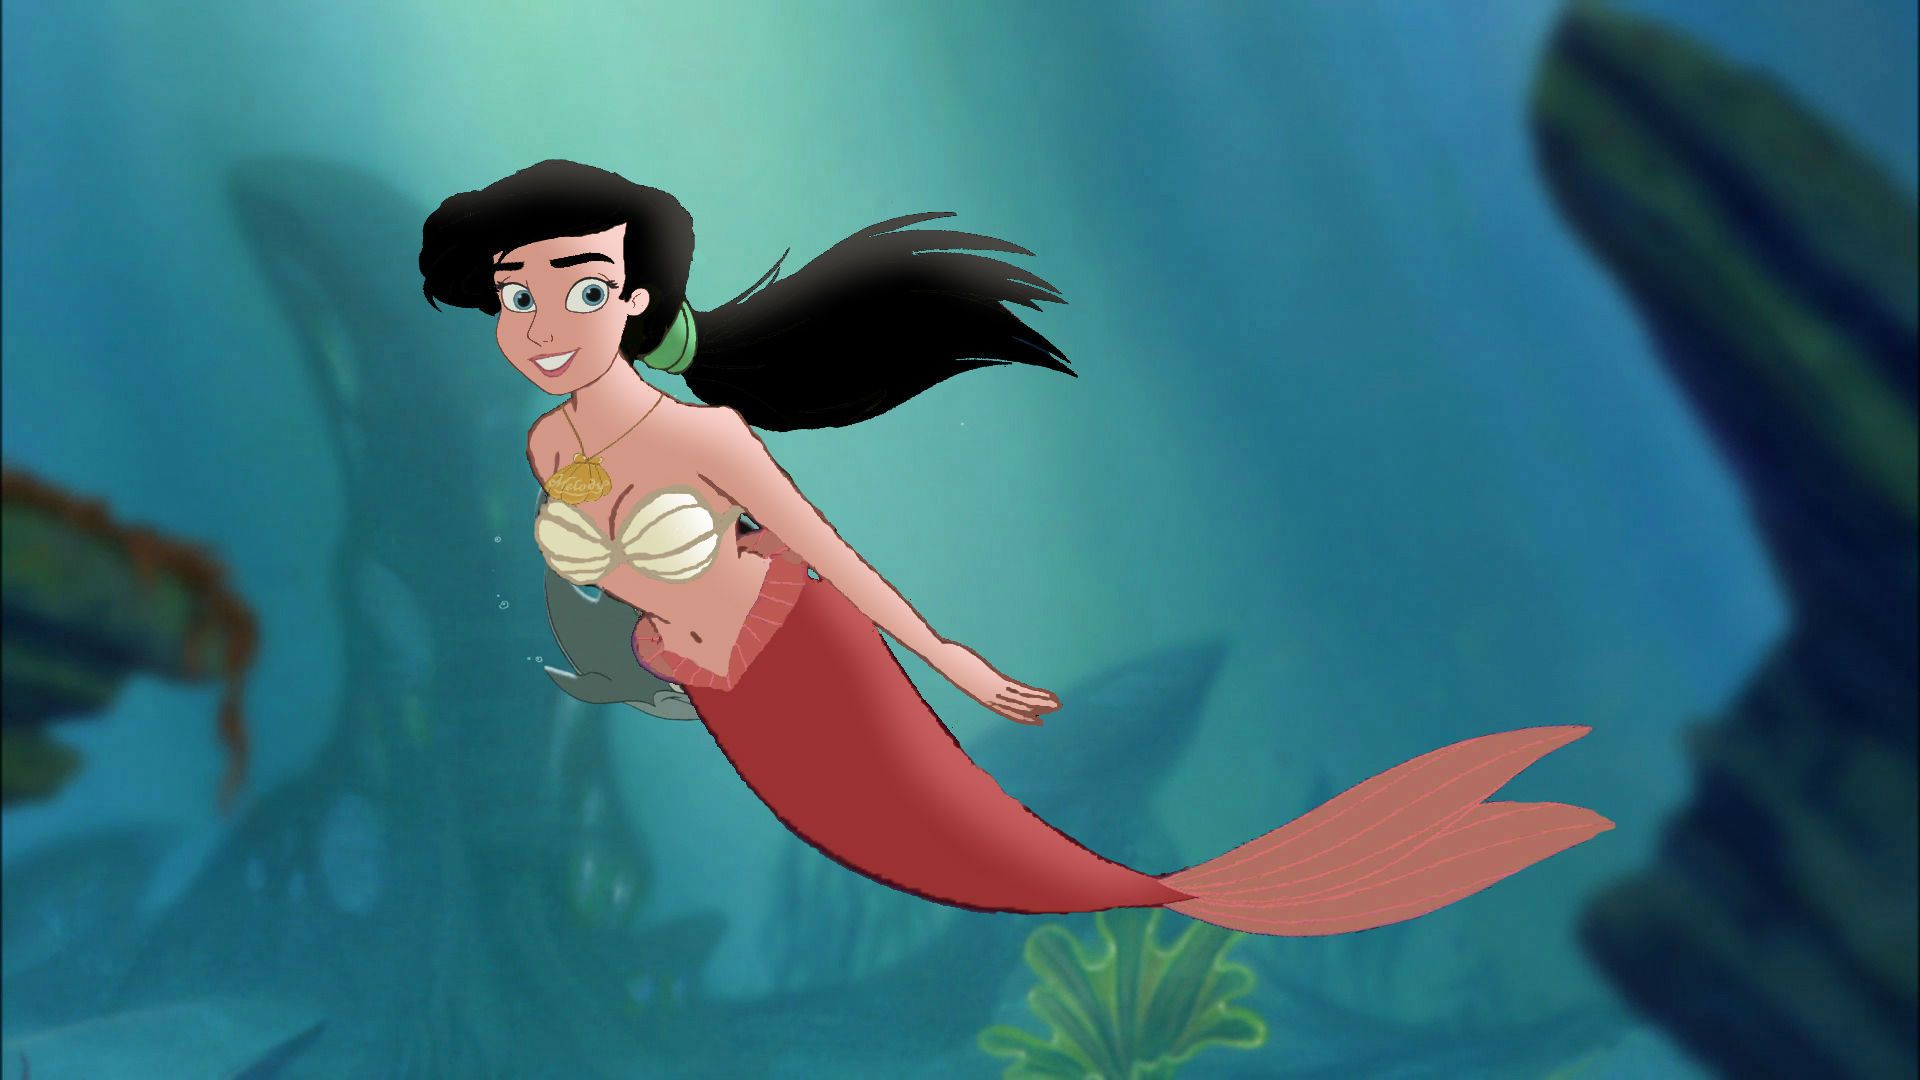 the little mermaid 2 melody grown up as a mermaid